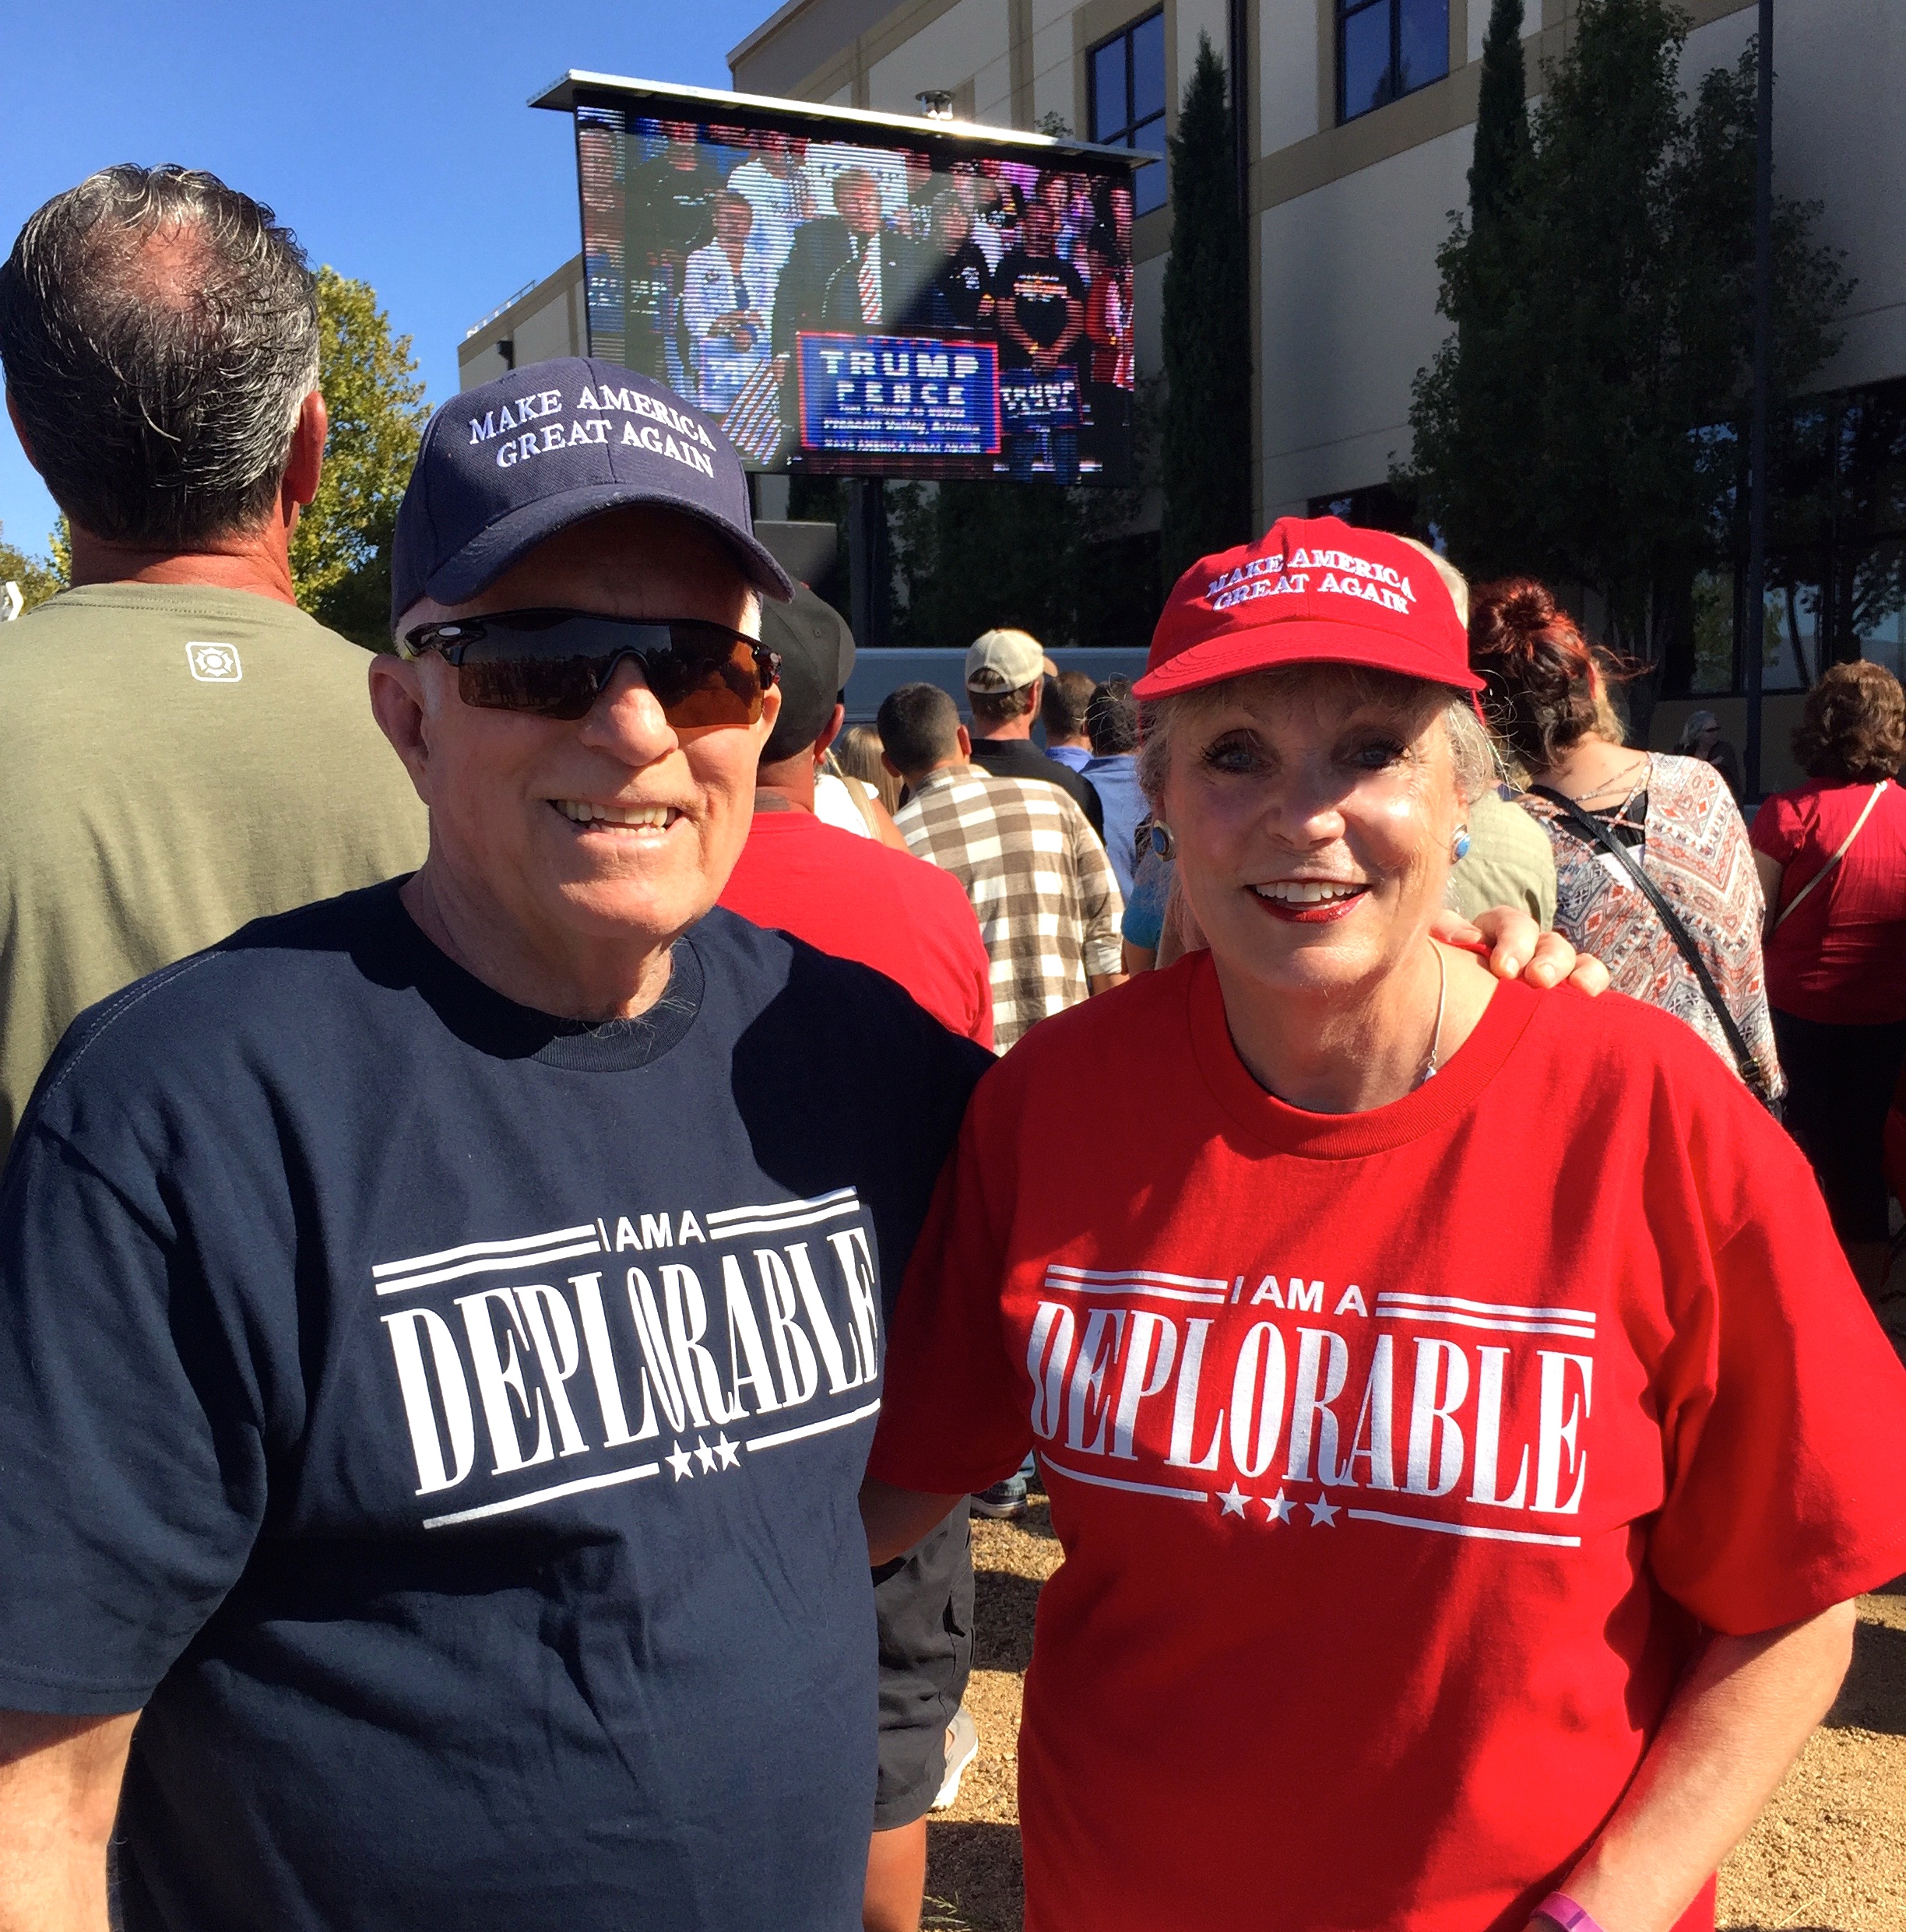 Deplorables_and_Proud!